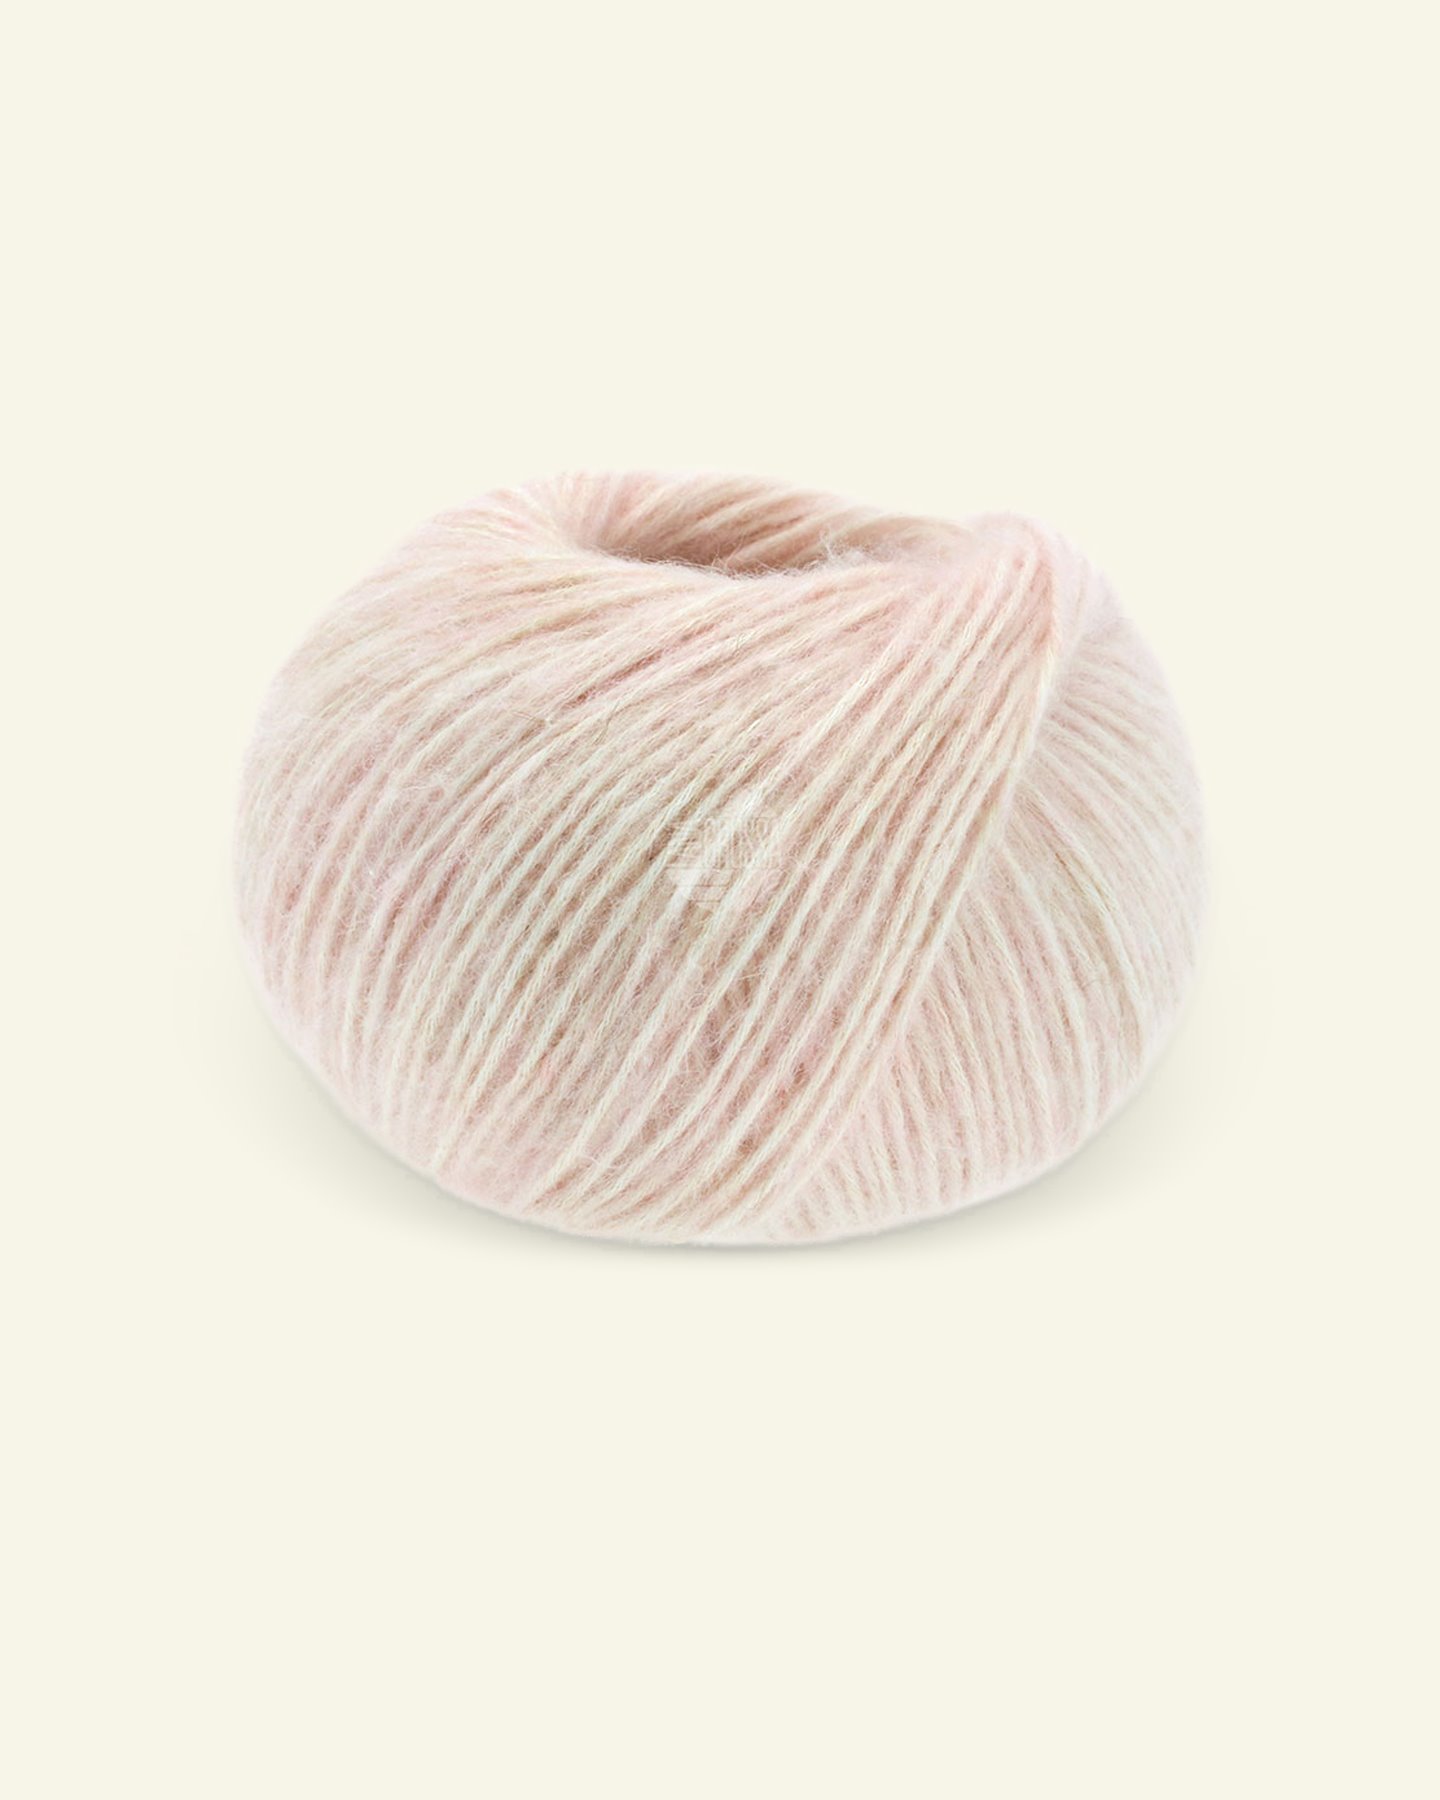 Buy Cotton yarn for knitting and crochet